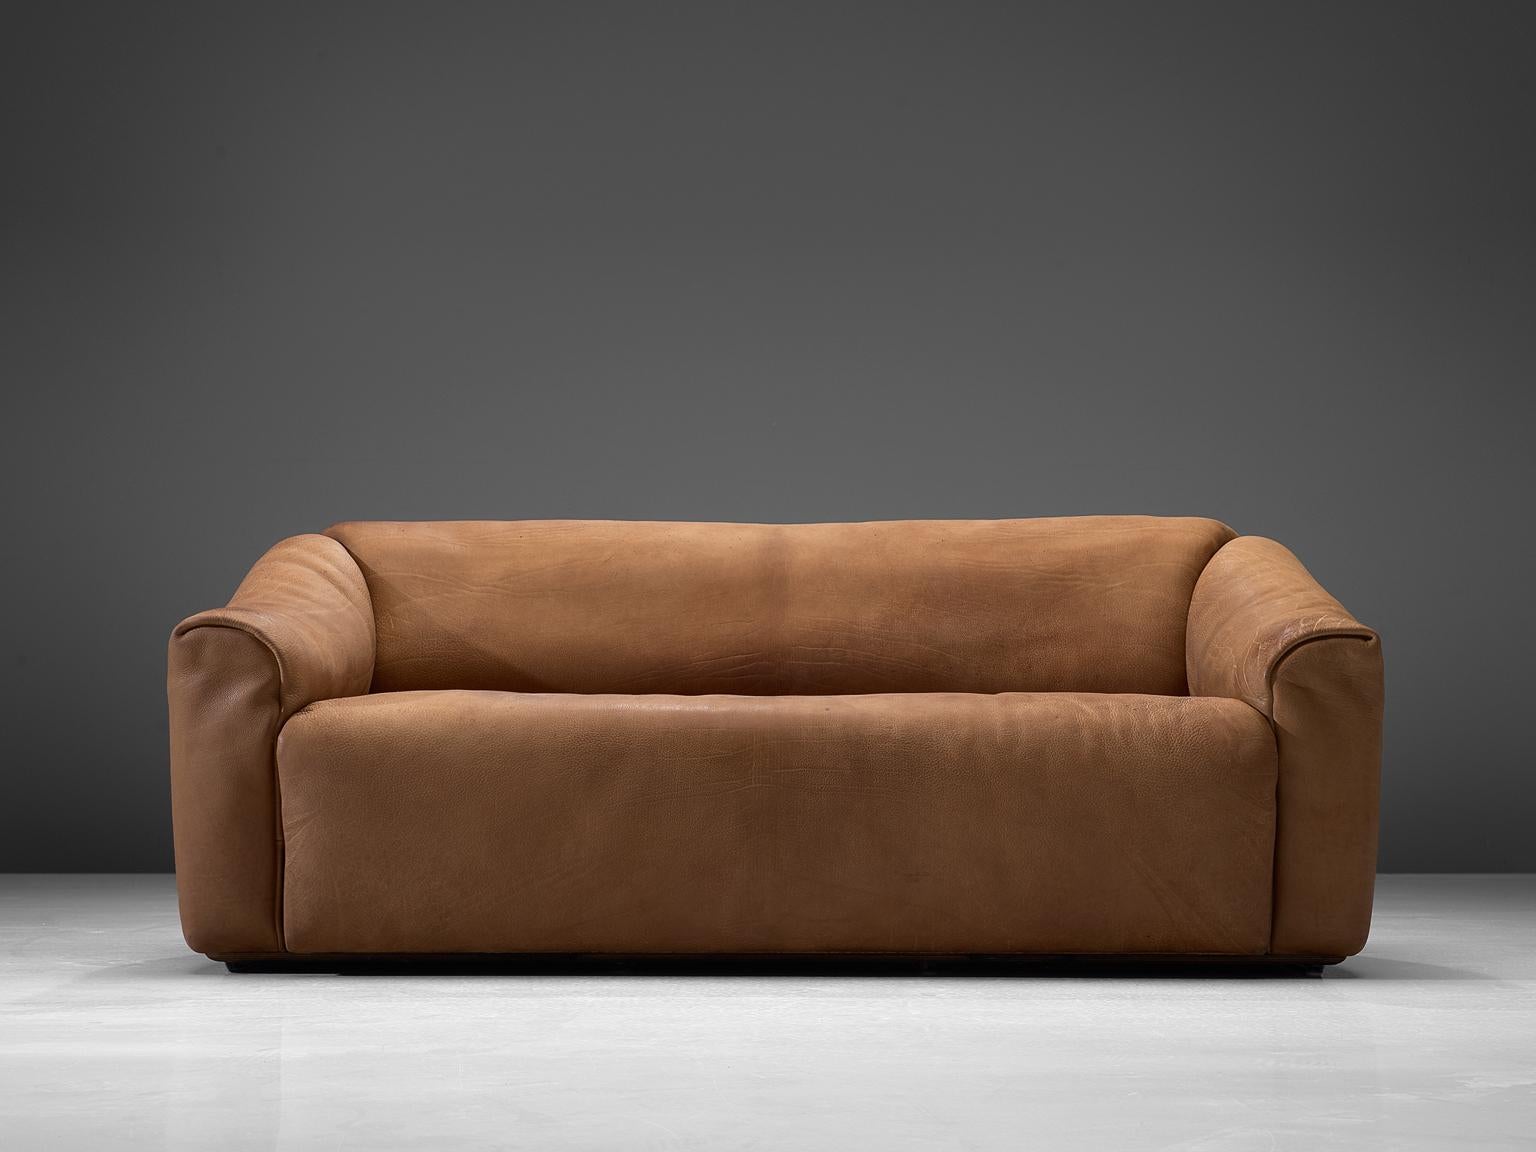 Highly comfortable DS47 sofa in light cognac leather by De Sede. The design is simplistic, yet very modern. A tight and cubic outside with a soft and curved inside, which emphasize the comfortable character of this set. The thick leather is laid in